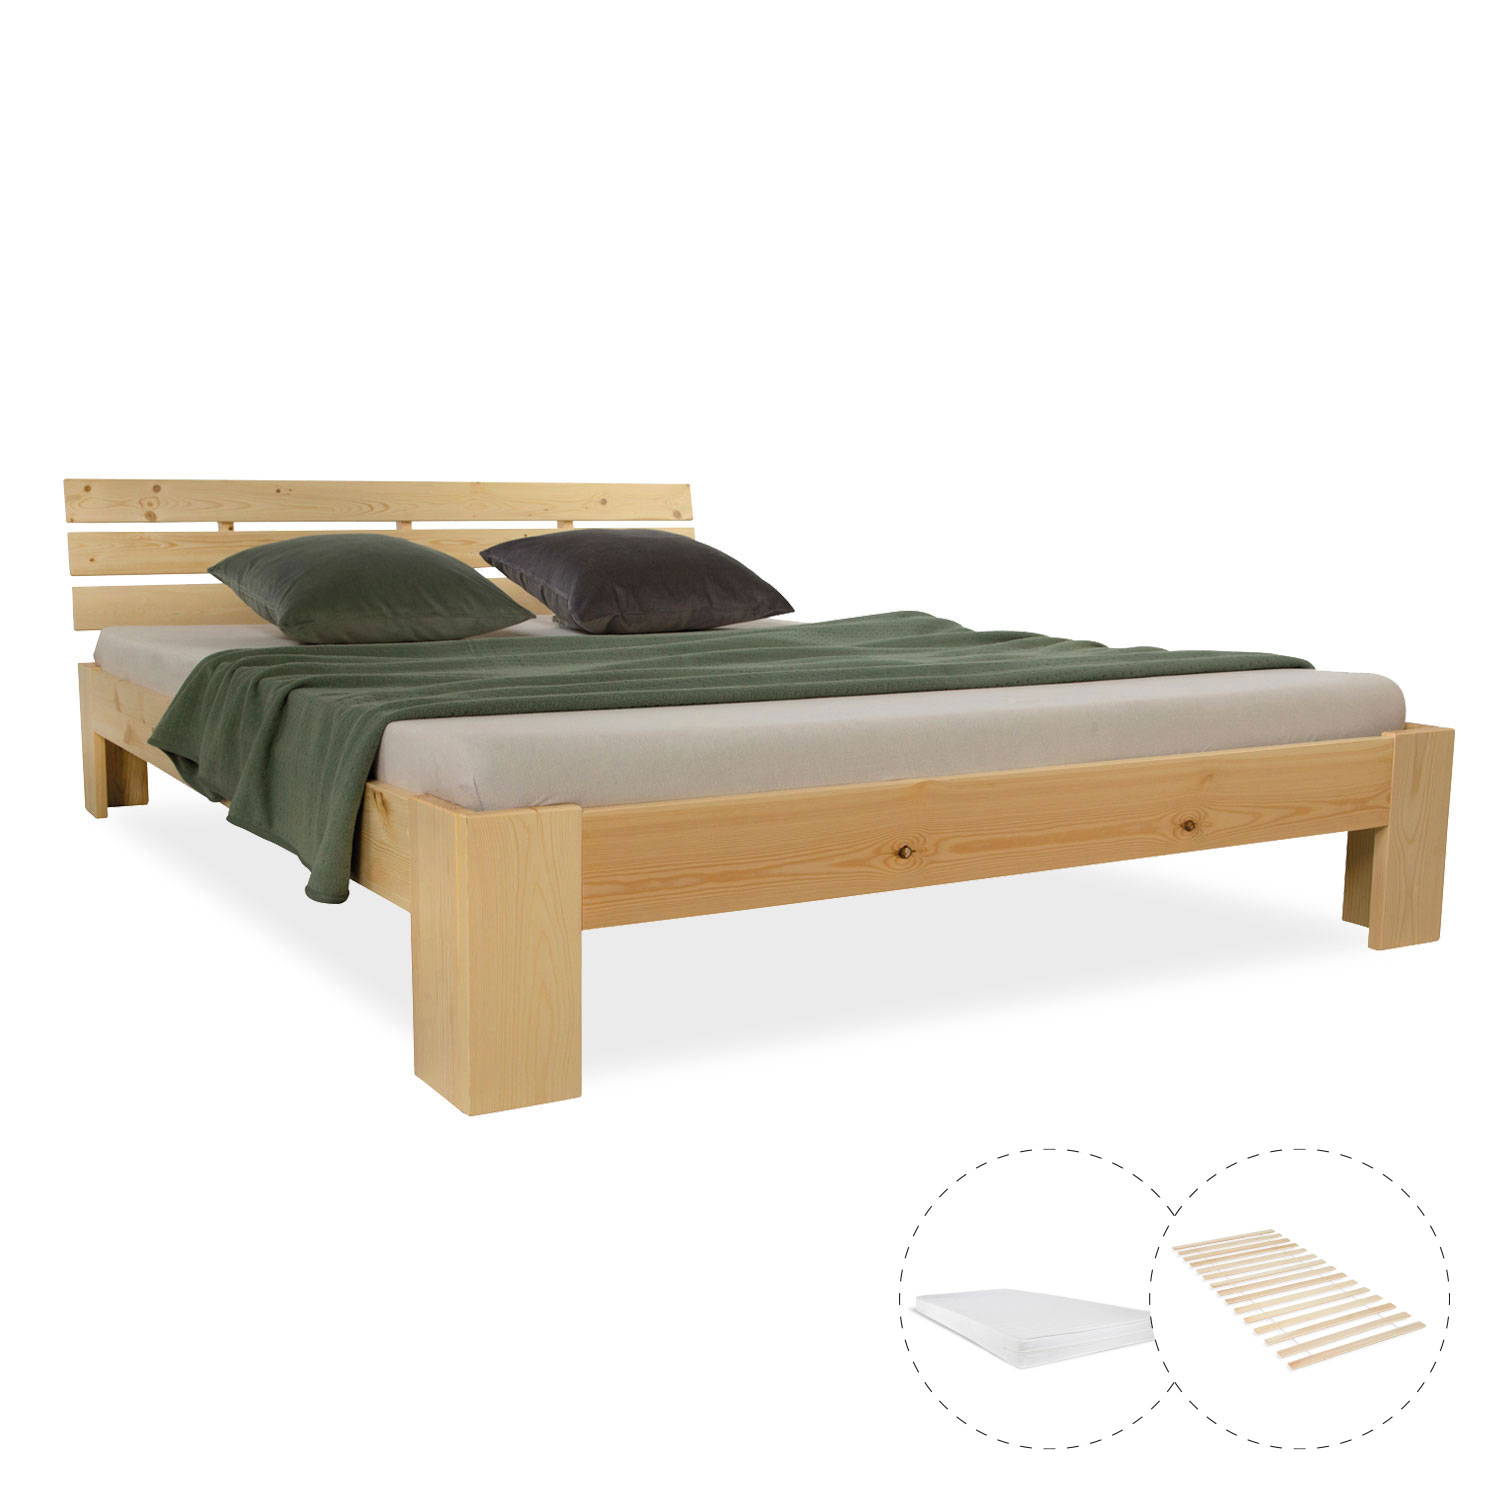 Double Bed with Mattress and Slatted Frame 120x200 Bed Nature Solid Pine Wooden Bed Futon Bed